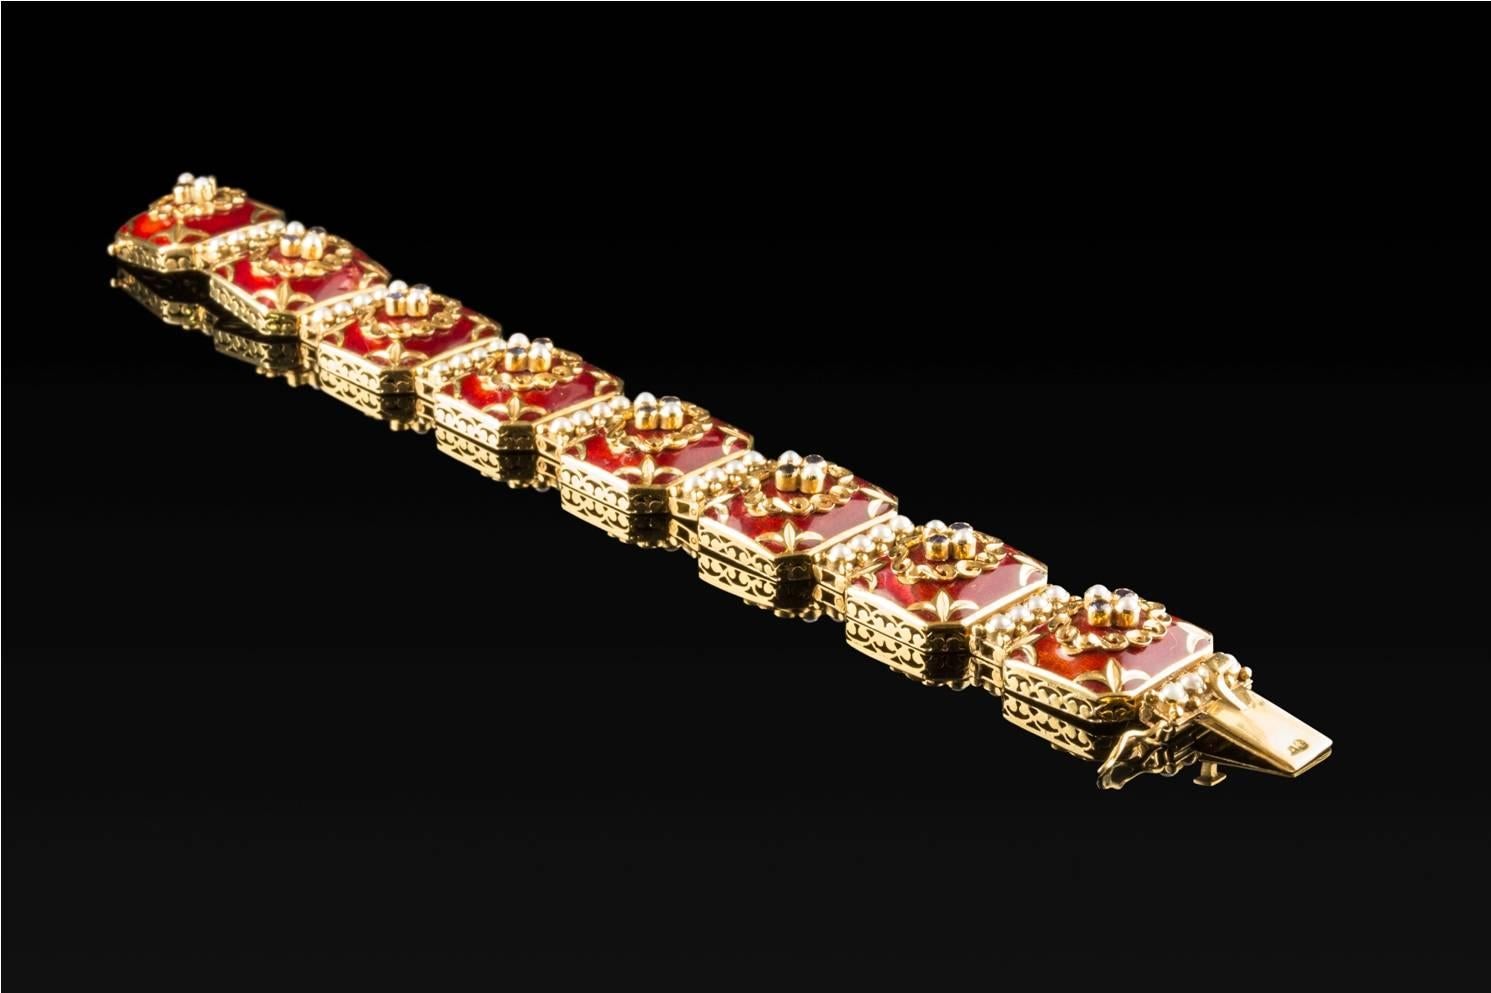 19.2-karat gold bracelet, enamelled centers in bordeaux color with Ceylon sapphires and pearls.
Beautiful traditional work Portuguese.
Weight: 72.4 gr.
Producer: Rosas de Portugal.